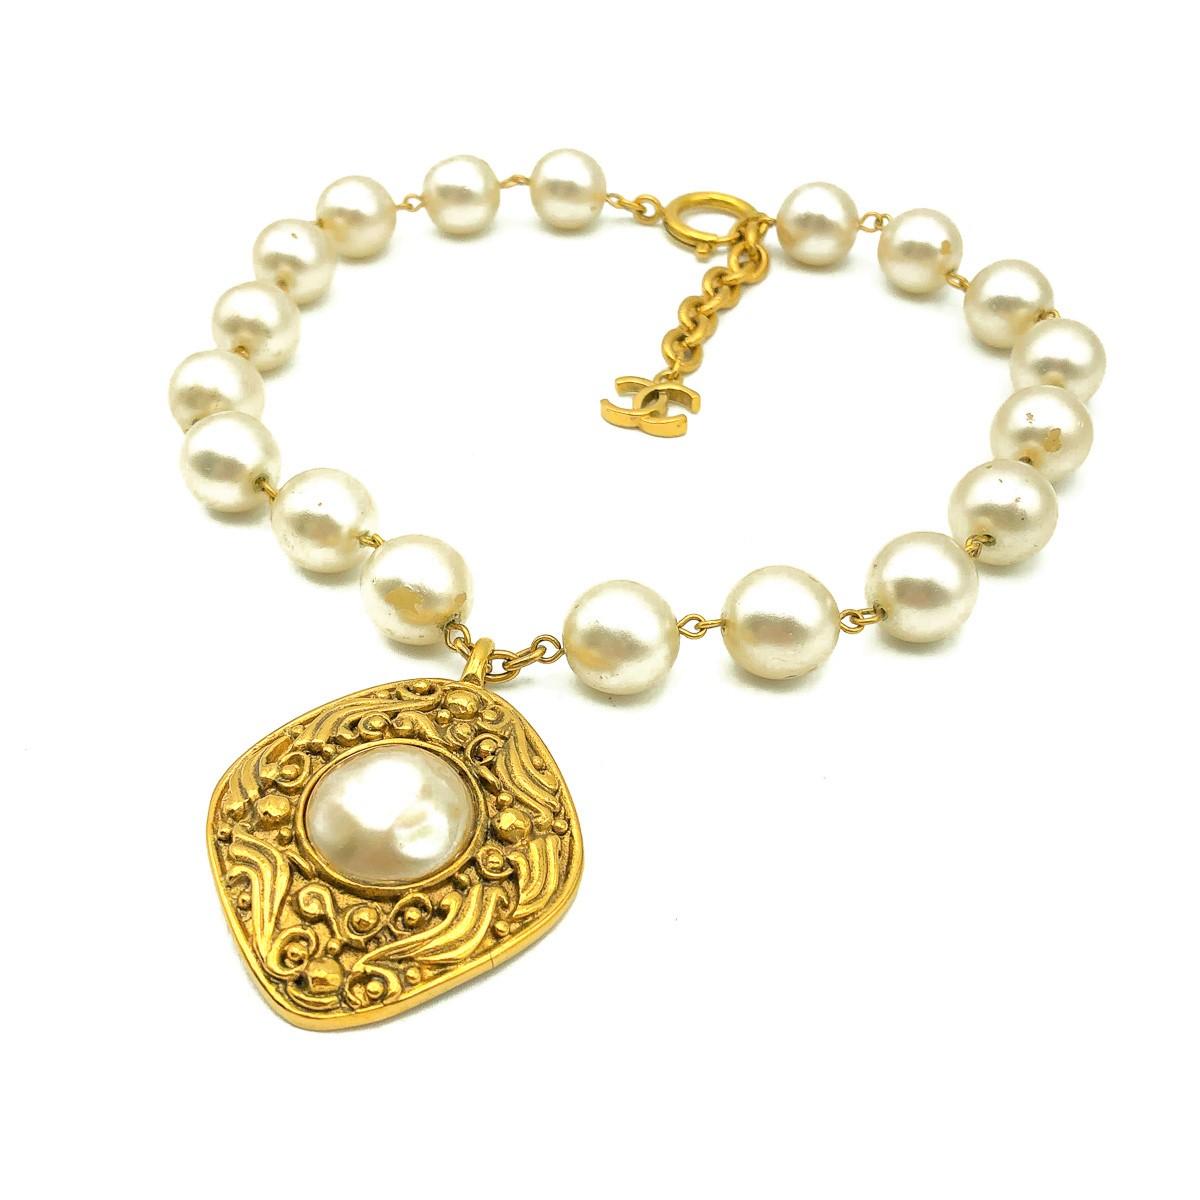 An impressive vintage Chanel Pearl Lozenge necklace from the 1970s. Featuring large baroque pearls strung on metal rods leading to a large etruscan inspired lozenge set with a large half baroque pearl. The necklace is finished to perfection with the